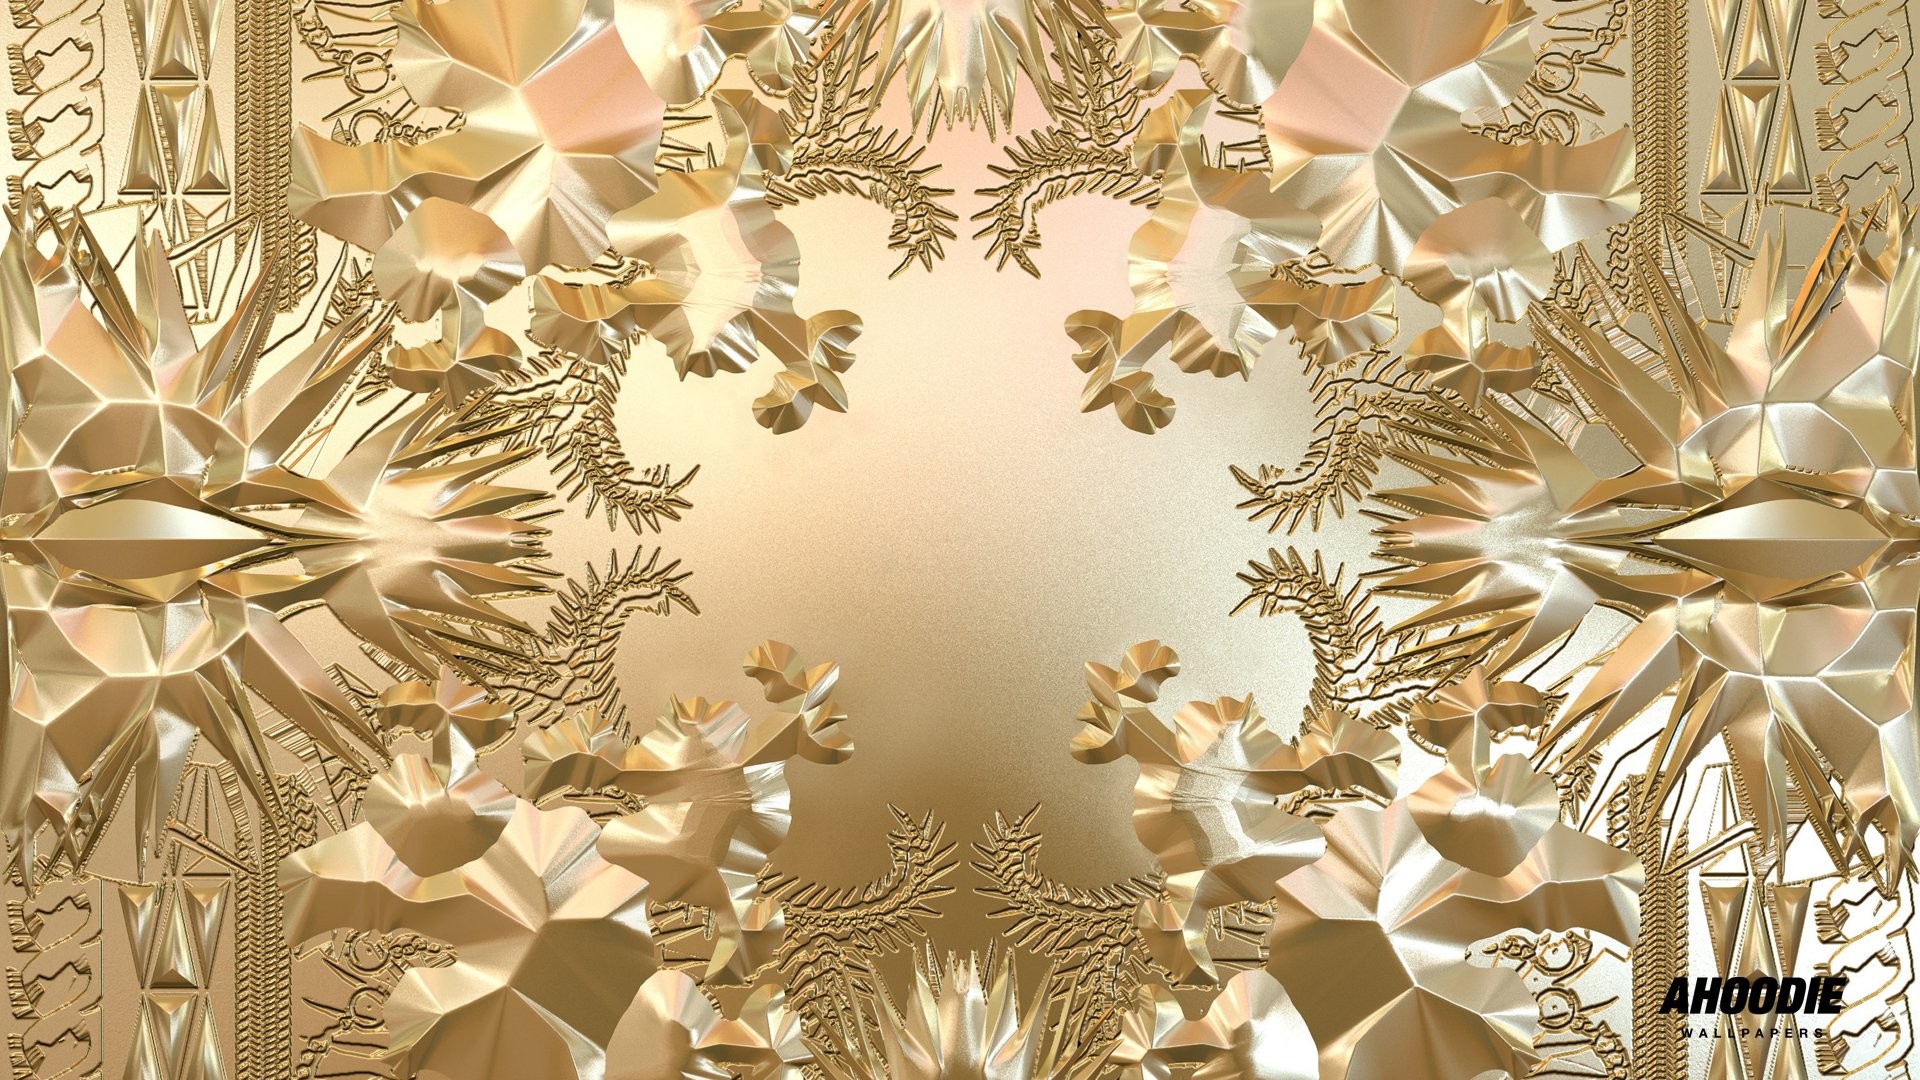 1920x1080 Kanye West Cover Watch The Throne ...